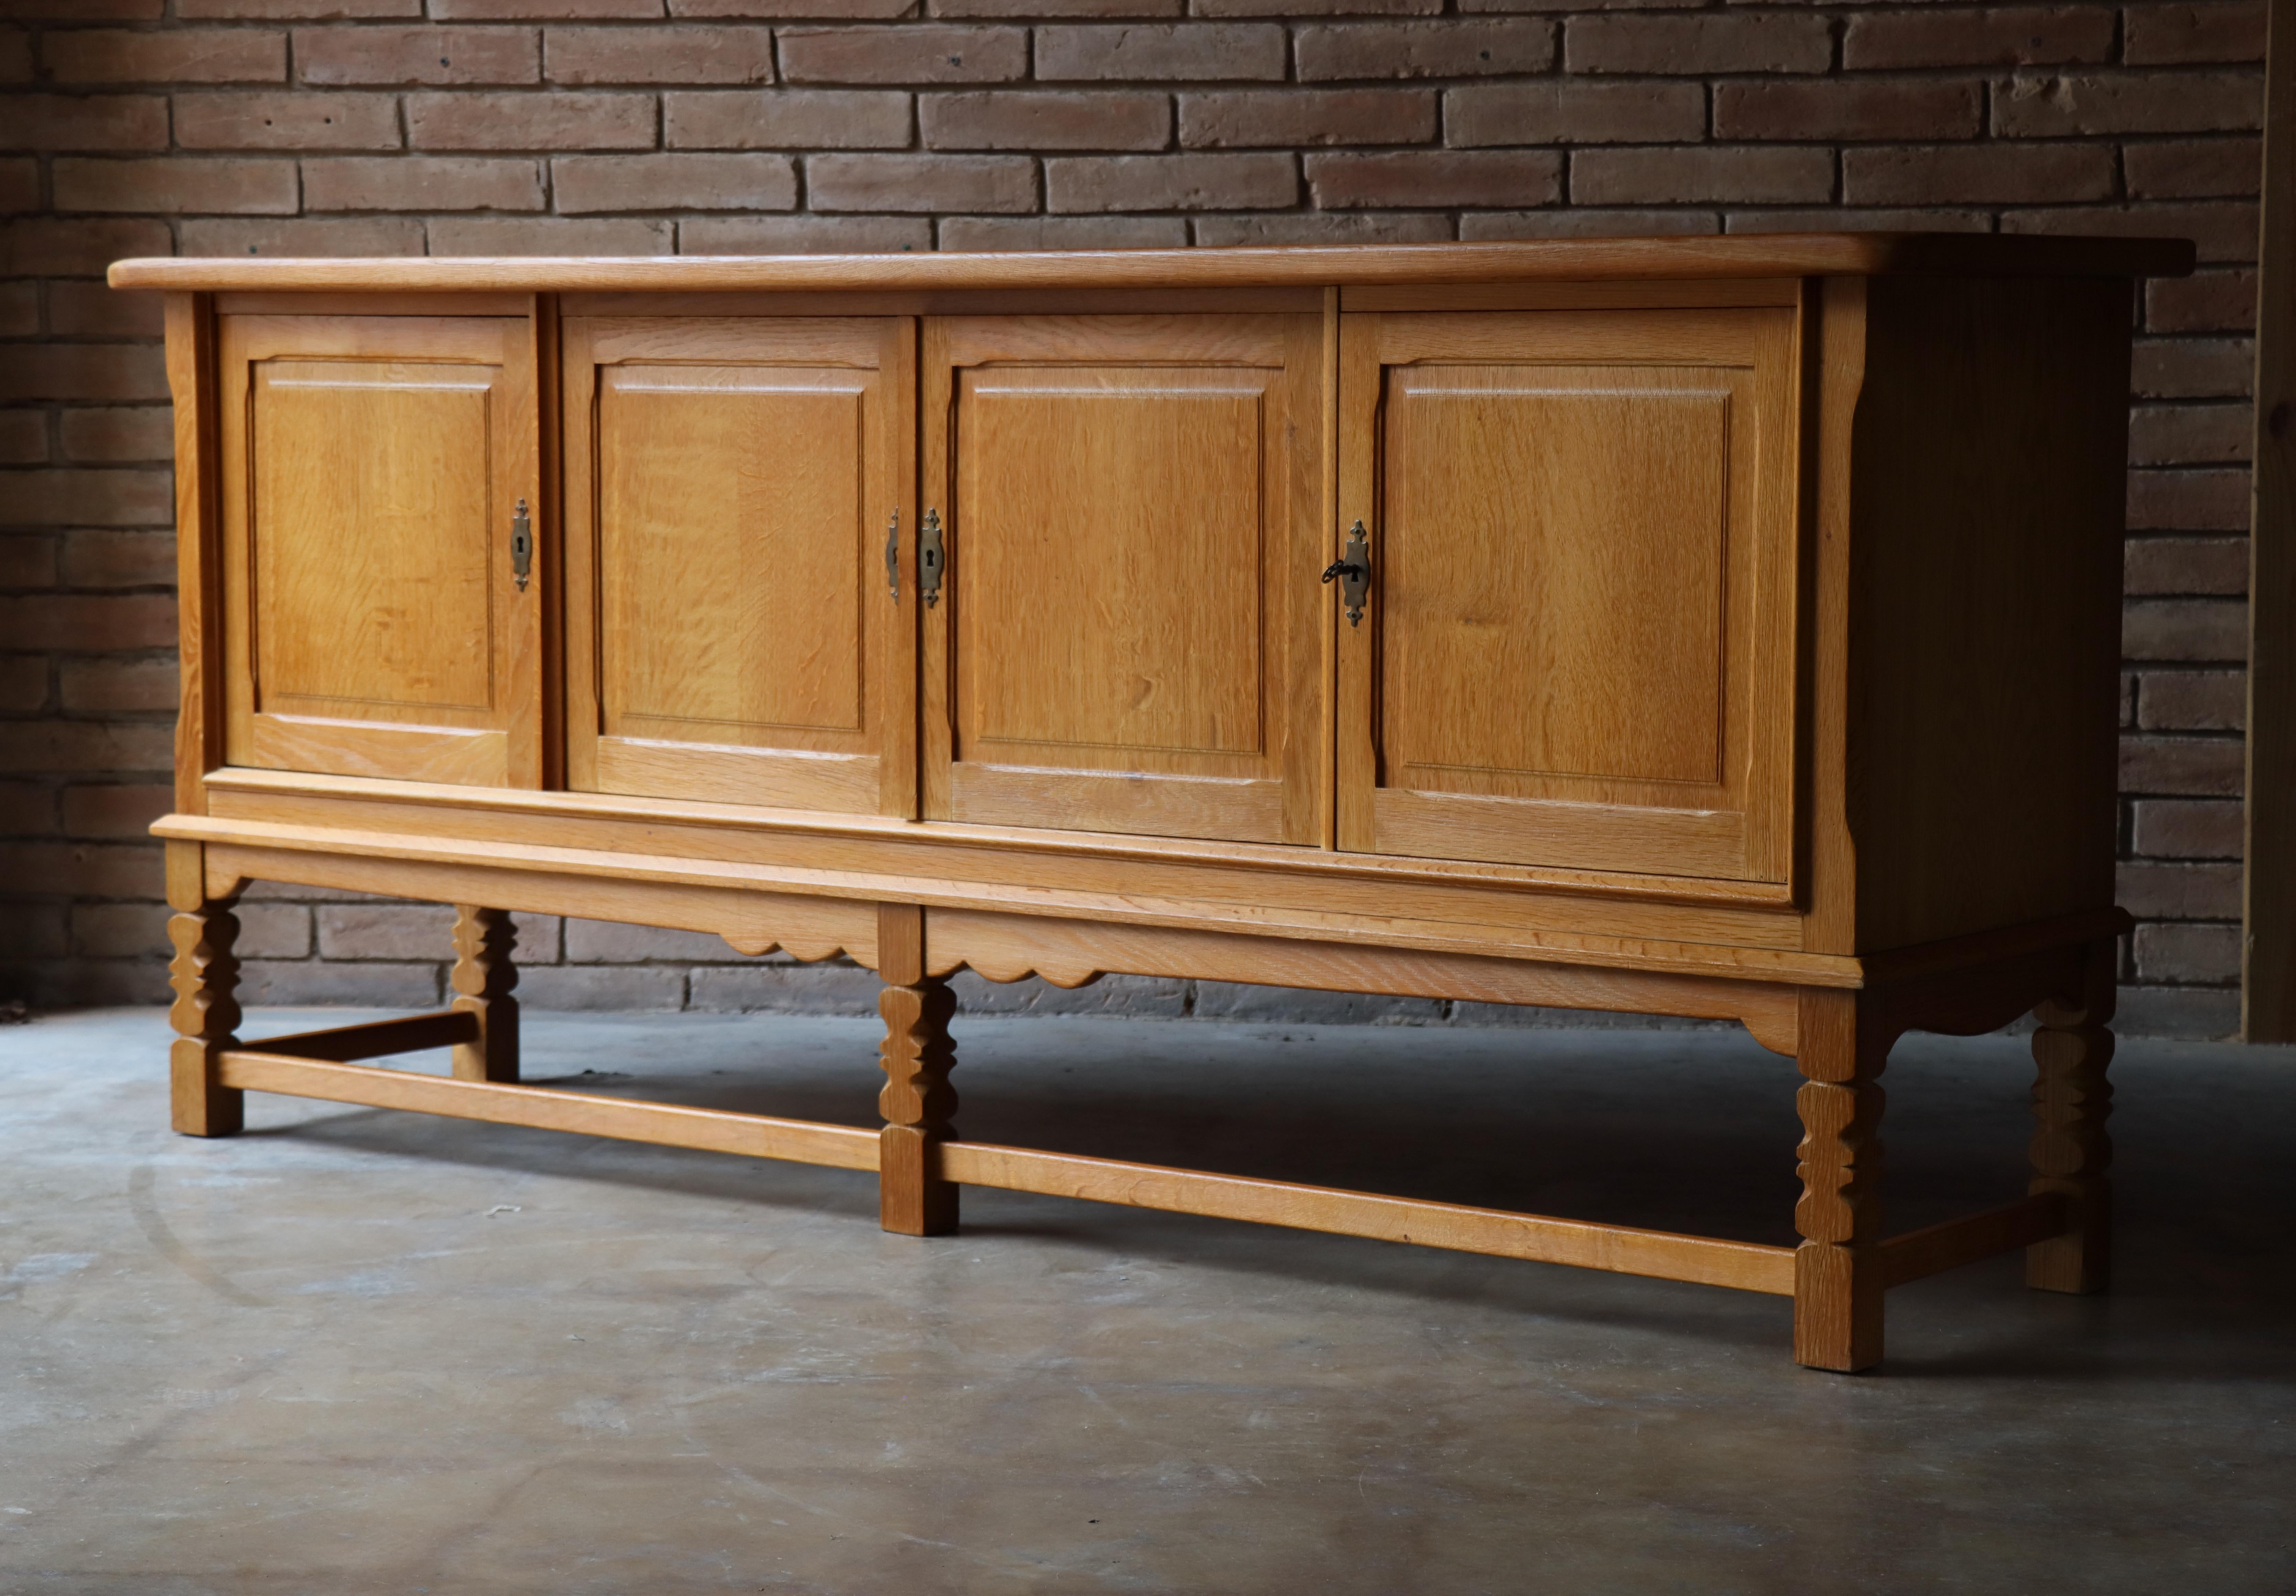 Danish sideboard by Henry (Henning) Kjaernulf. Handcrafted from completely solid quarter-sawn oak, this statement cabinet offers ample storage and focus on functionality. Each opens to reveal a solid oak interior with adjustable shelving and three